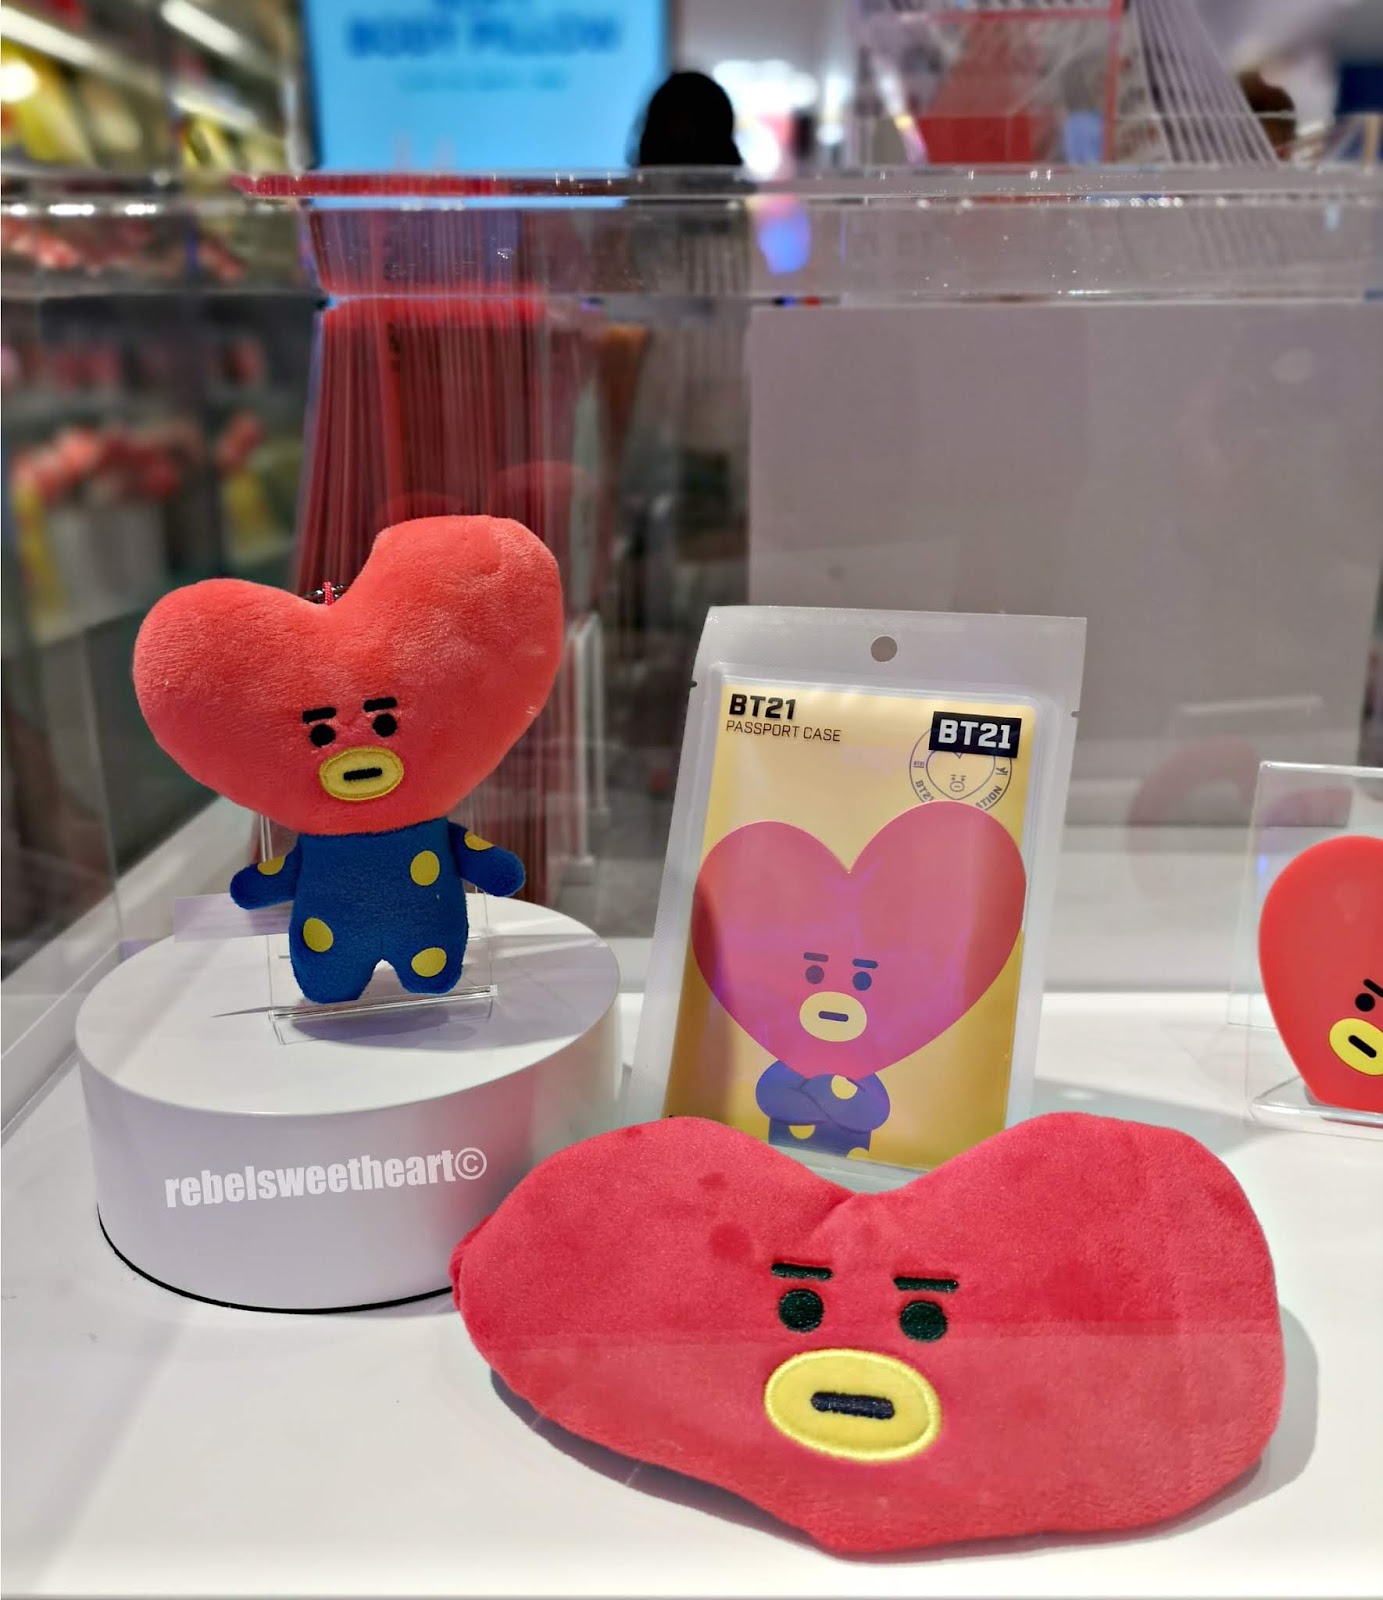 The Rebel Sweetheart.: Seoul Searching | BT21 at Line Friends Store.